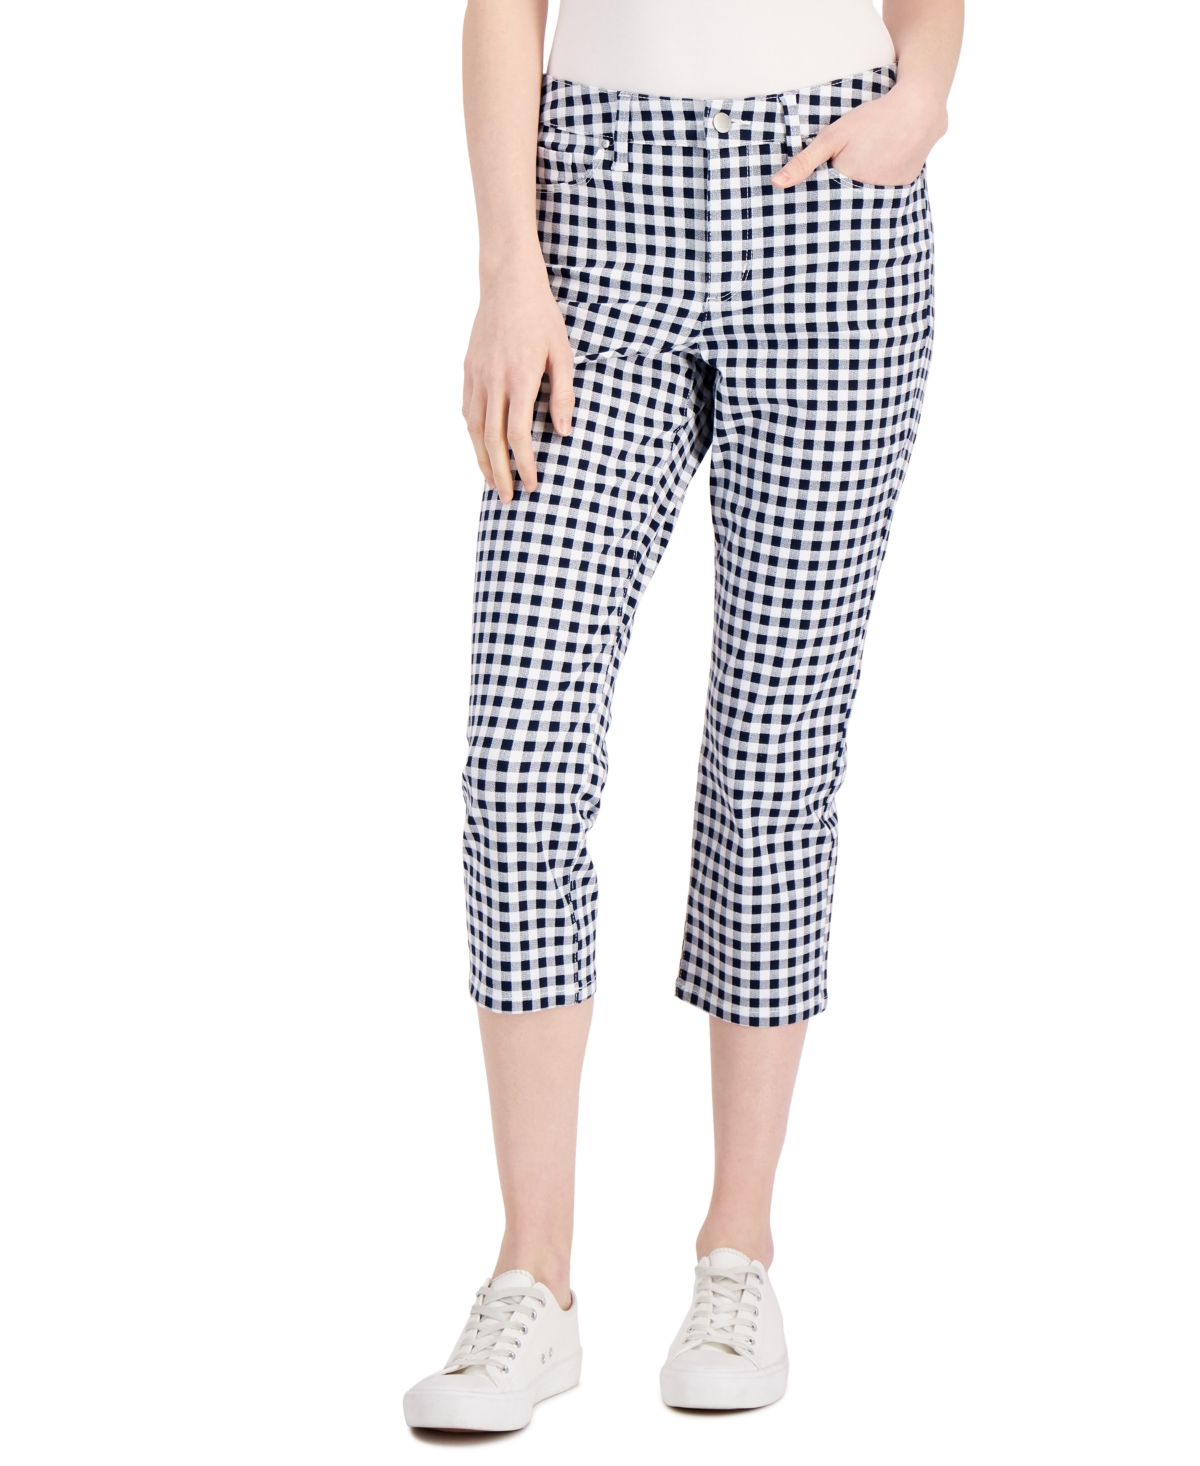  Charter Club Women's Bristol Gingham Tummy-Control Jeans, Created for Macy's